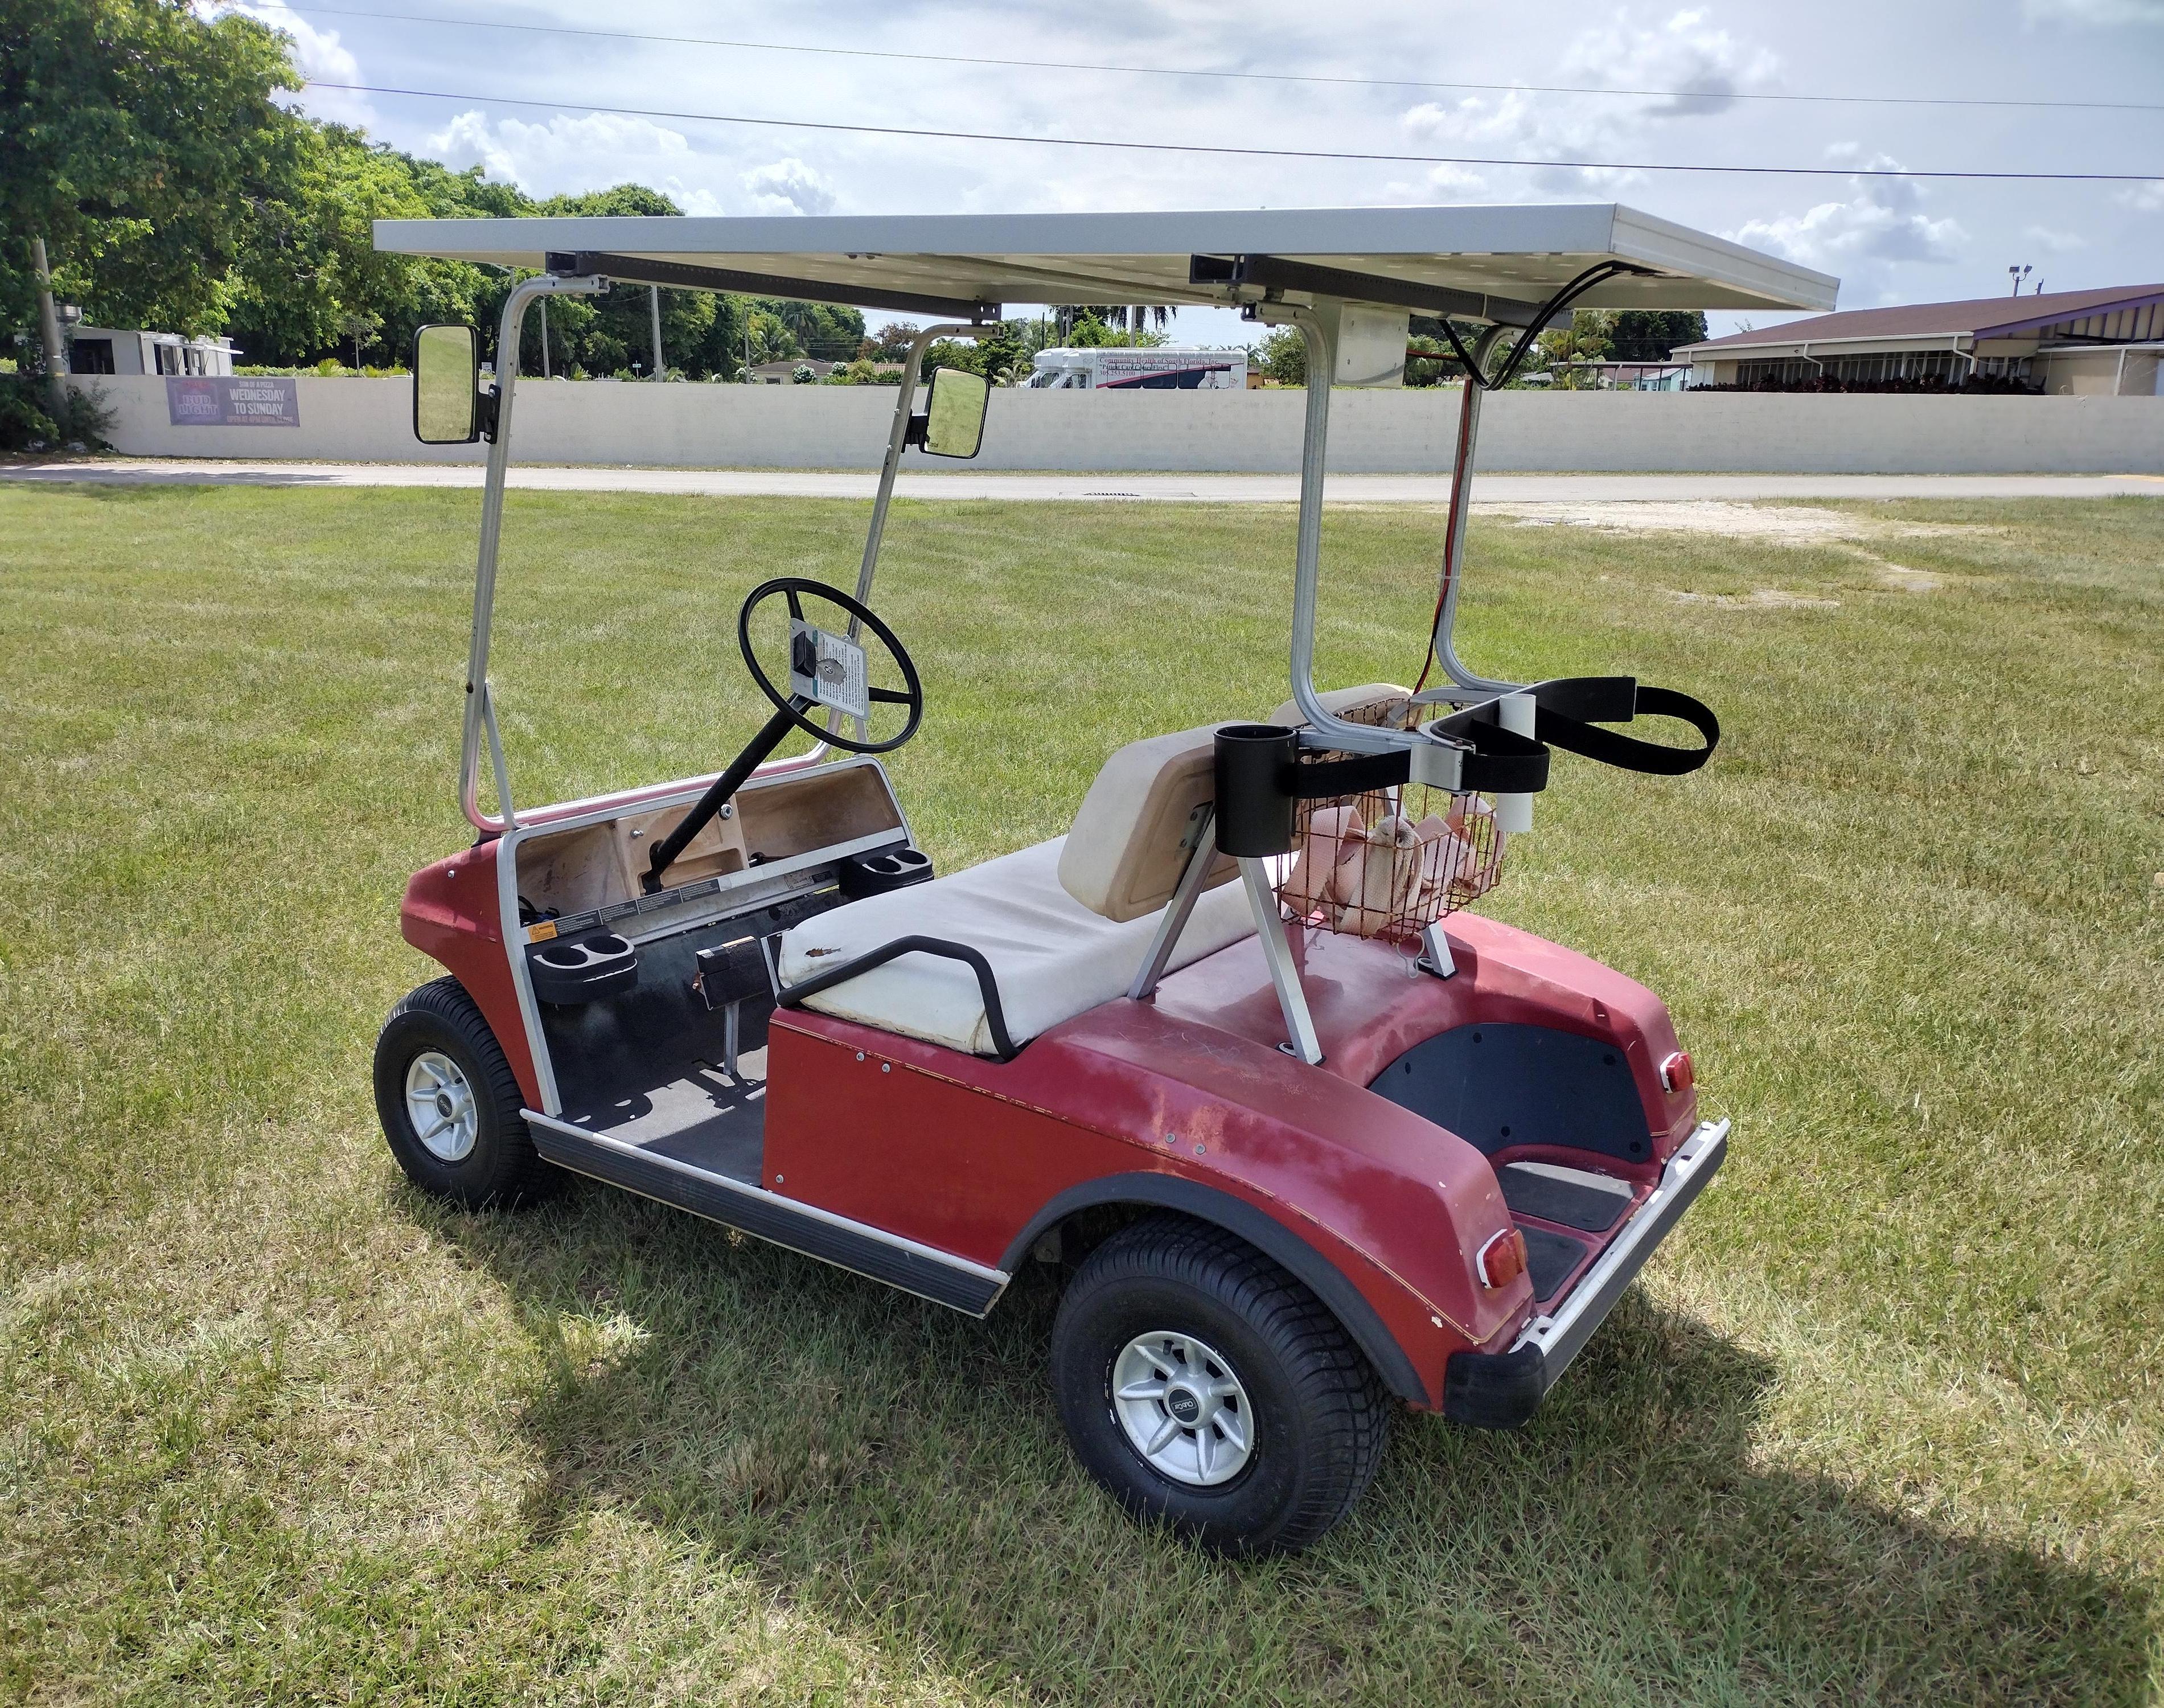 Solar Golf Cart on a Budget - a Self Charging Battery Bank on Wheels